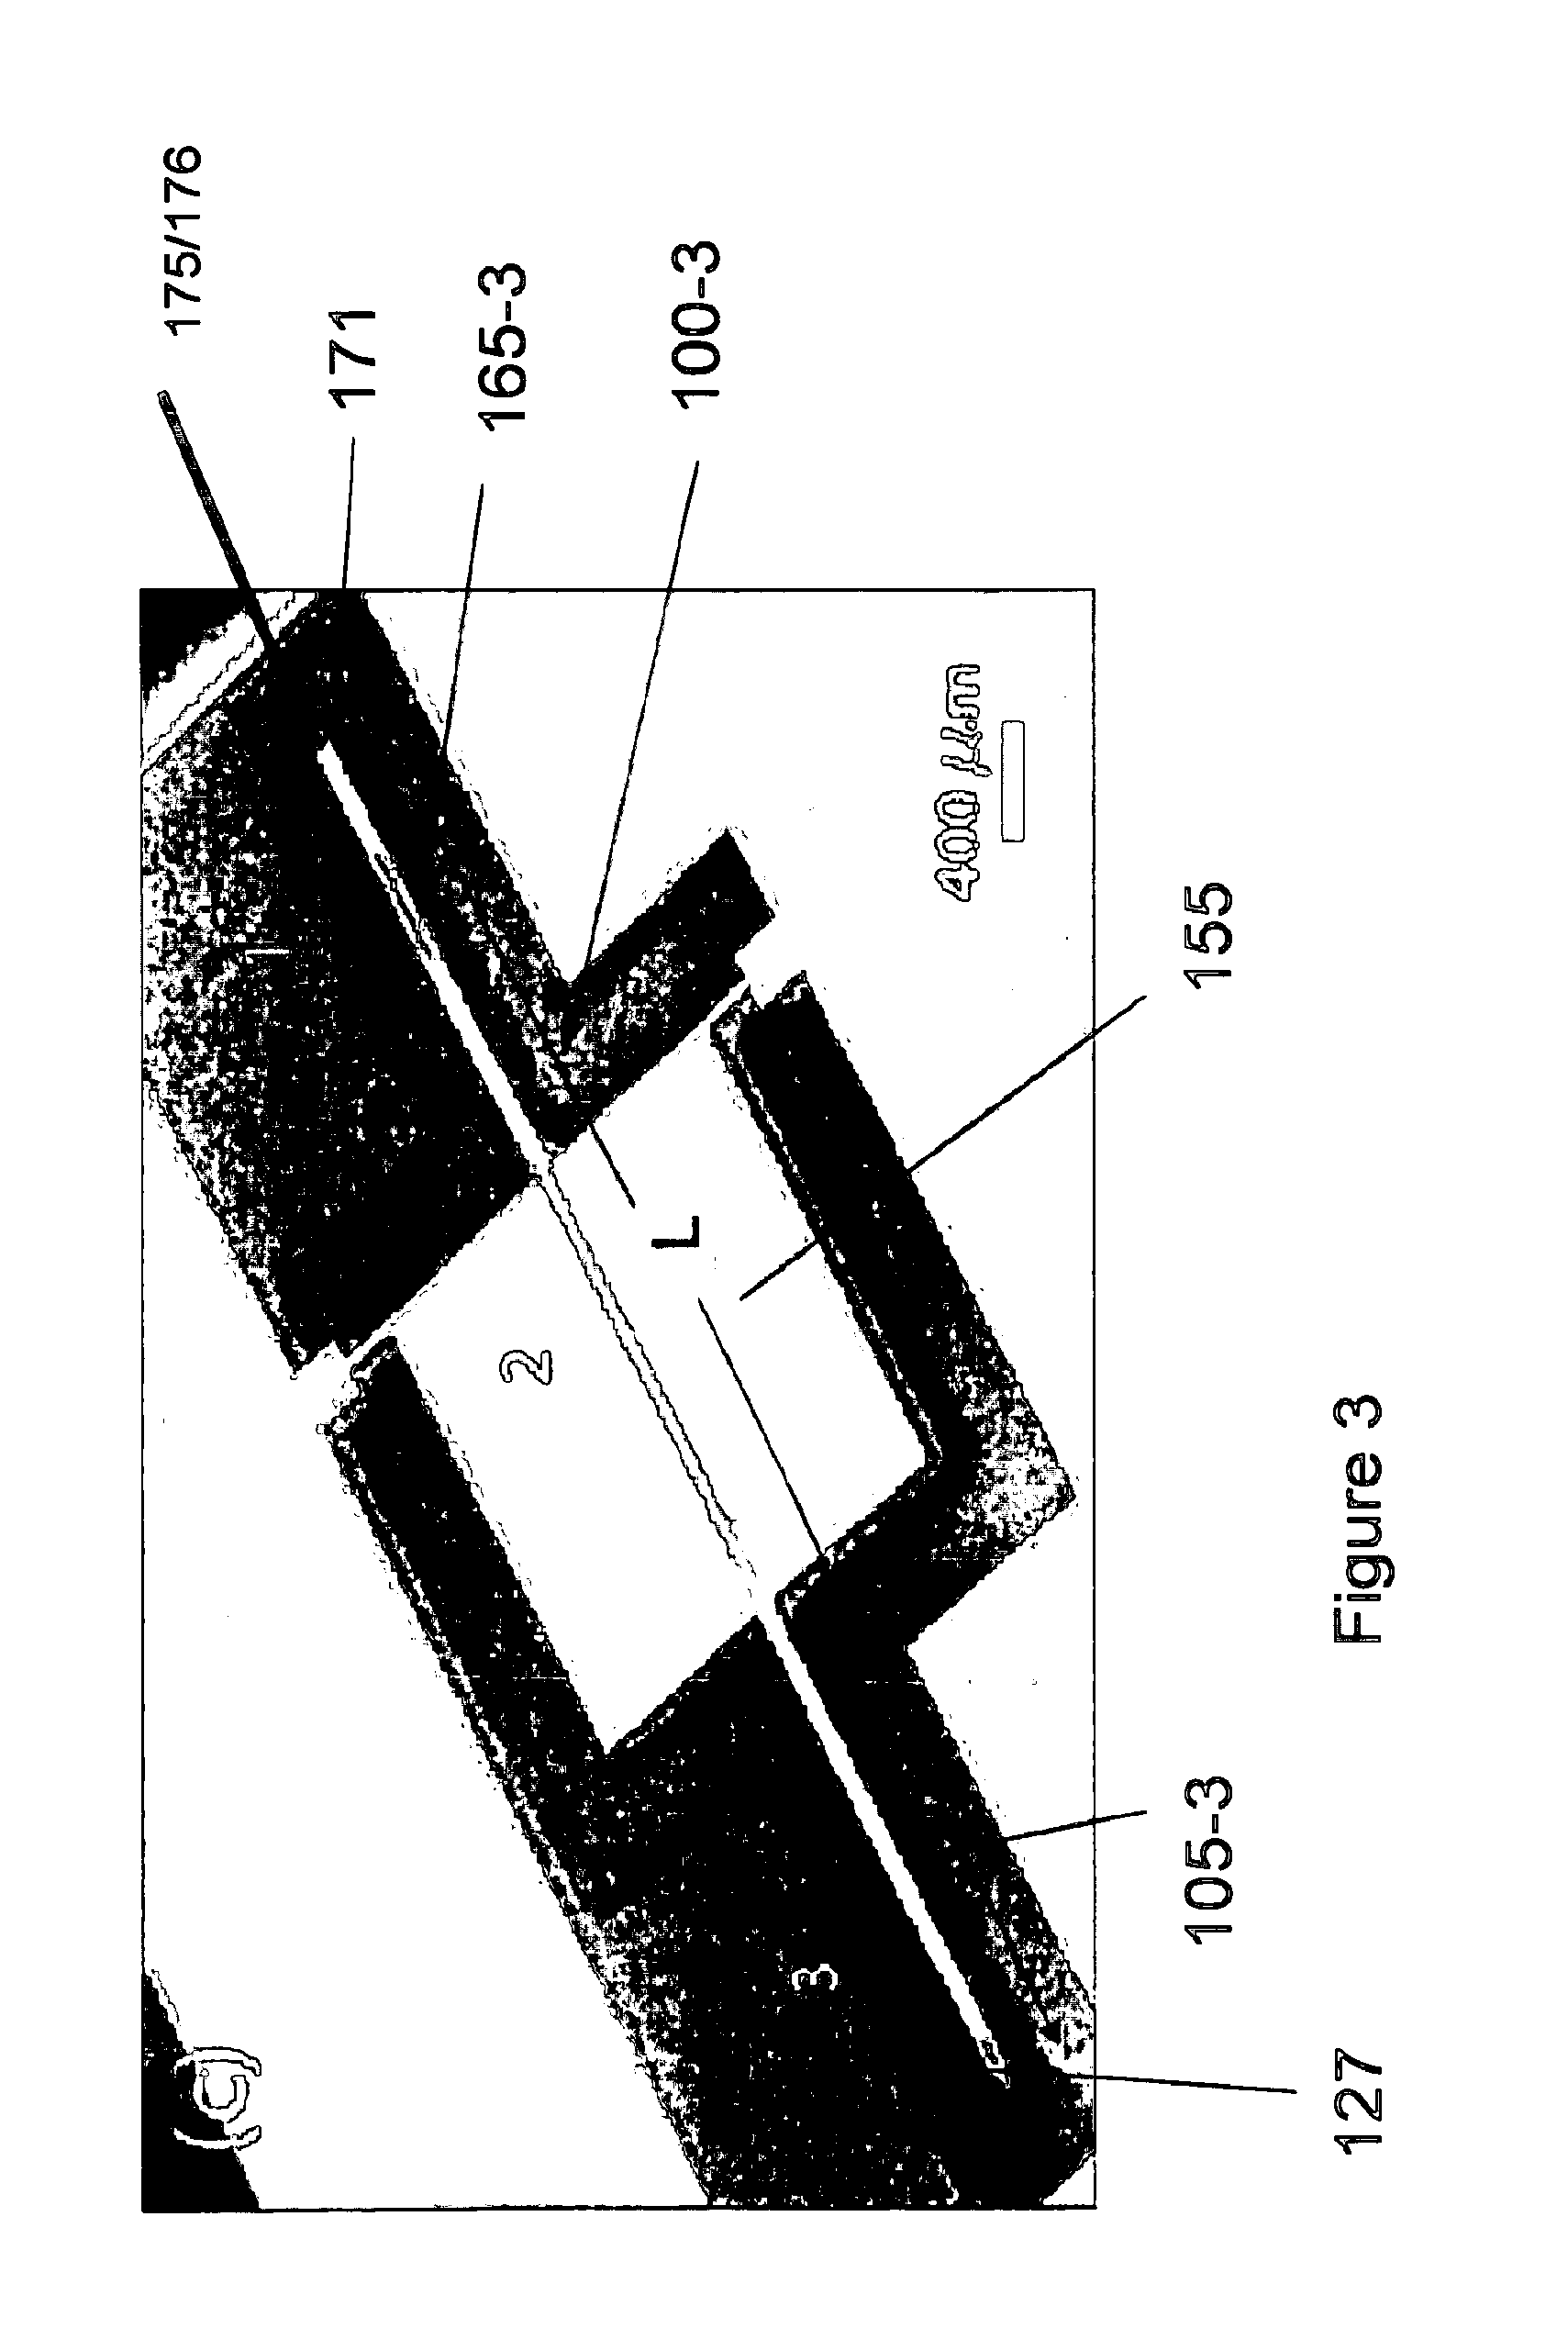 Convection enhanced delivery apparatus, method, and application